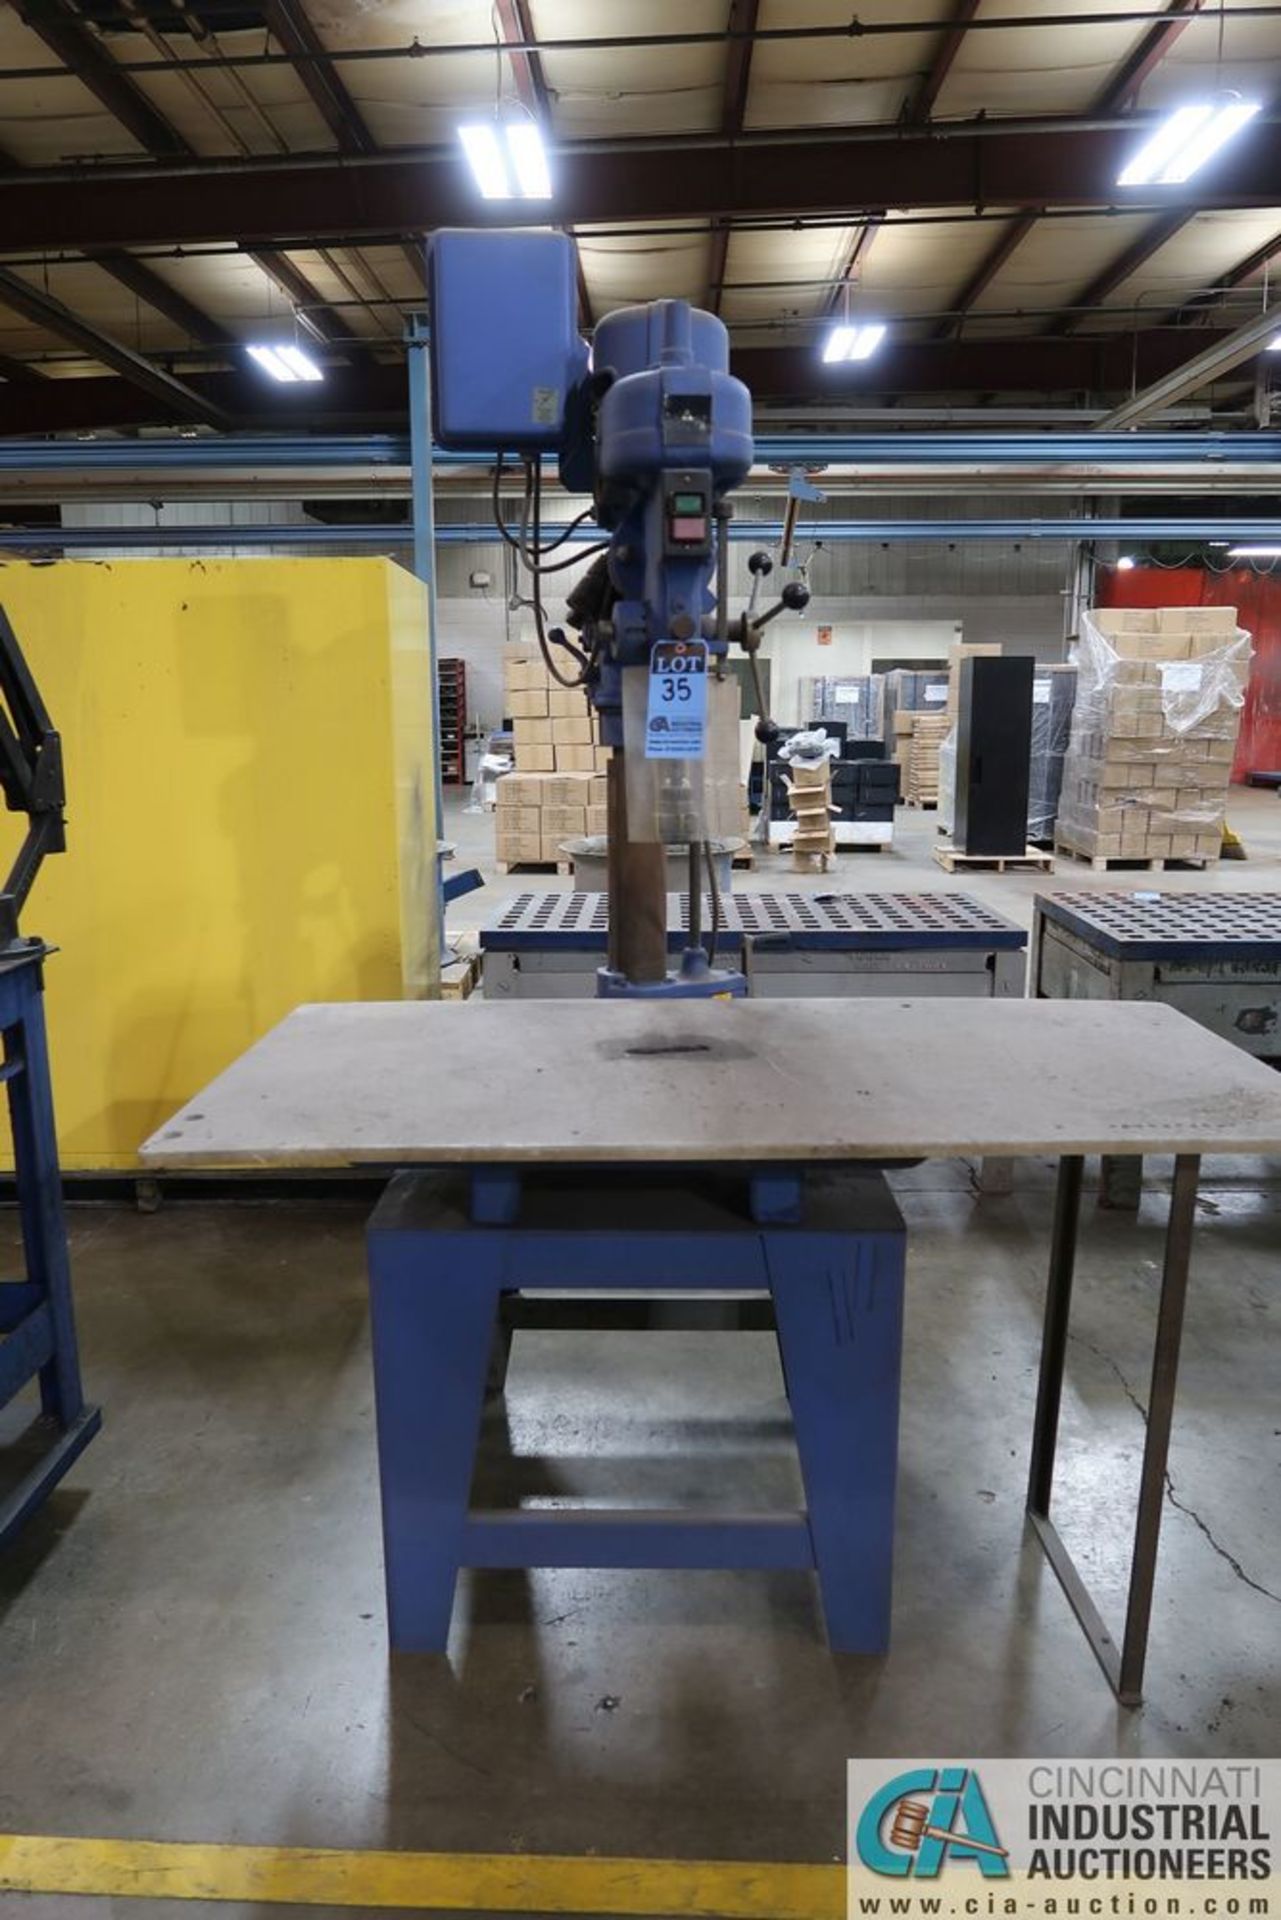 36" DELTA CAT NO. 15-127 STAND MOUNTED SINGLE SPINDLE DRILL**Loading Fee Due the "ERRA", $50.00** - Image 5 of 7